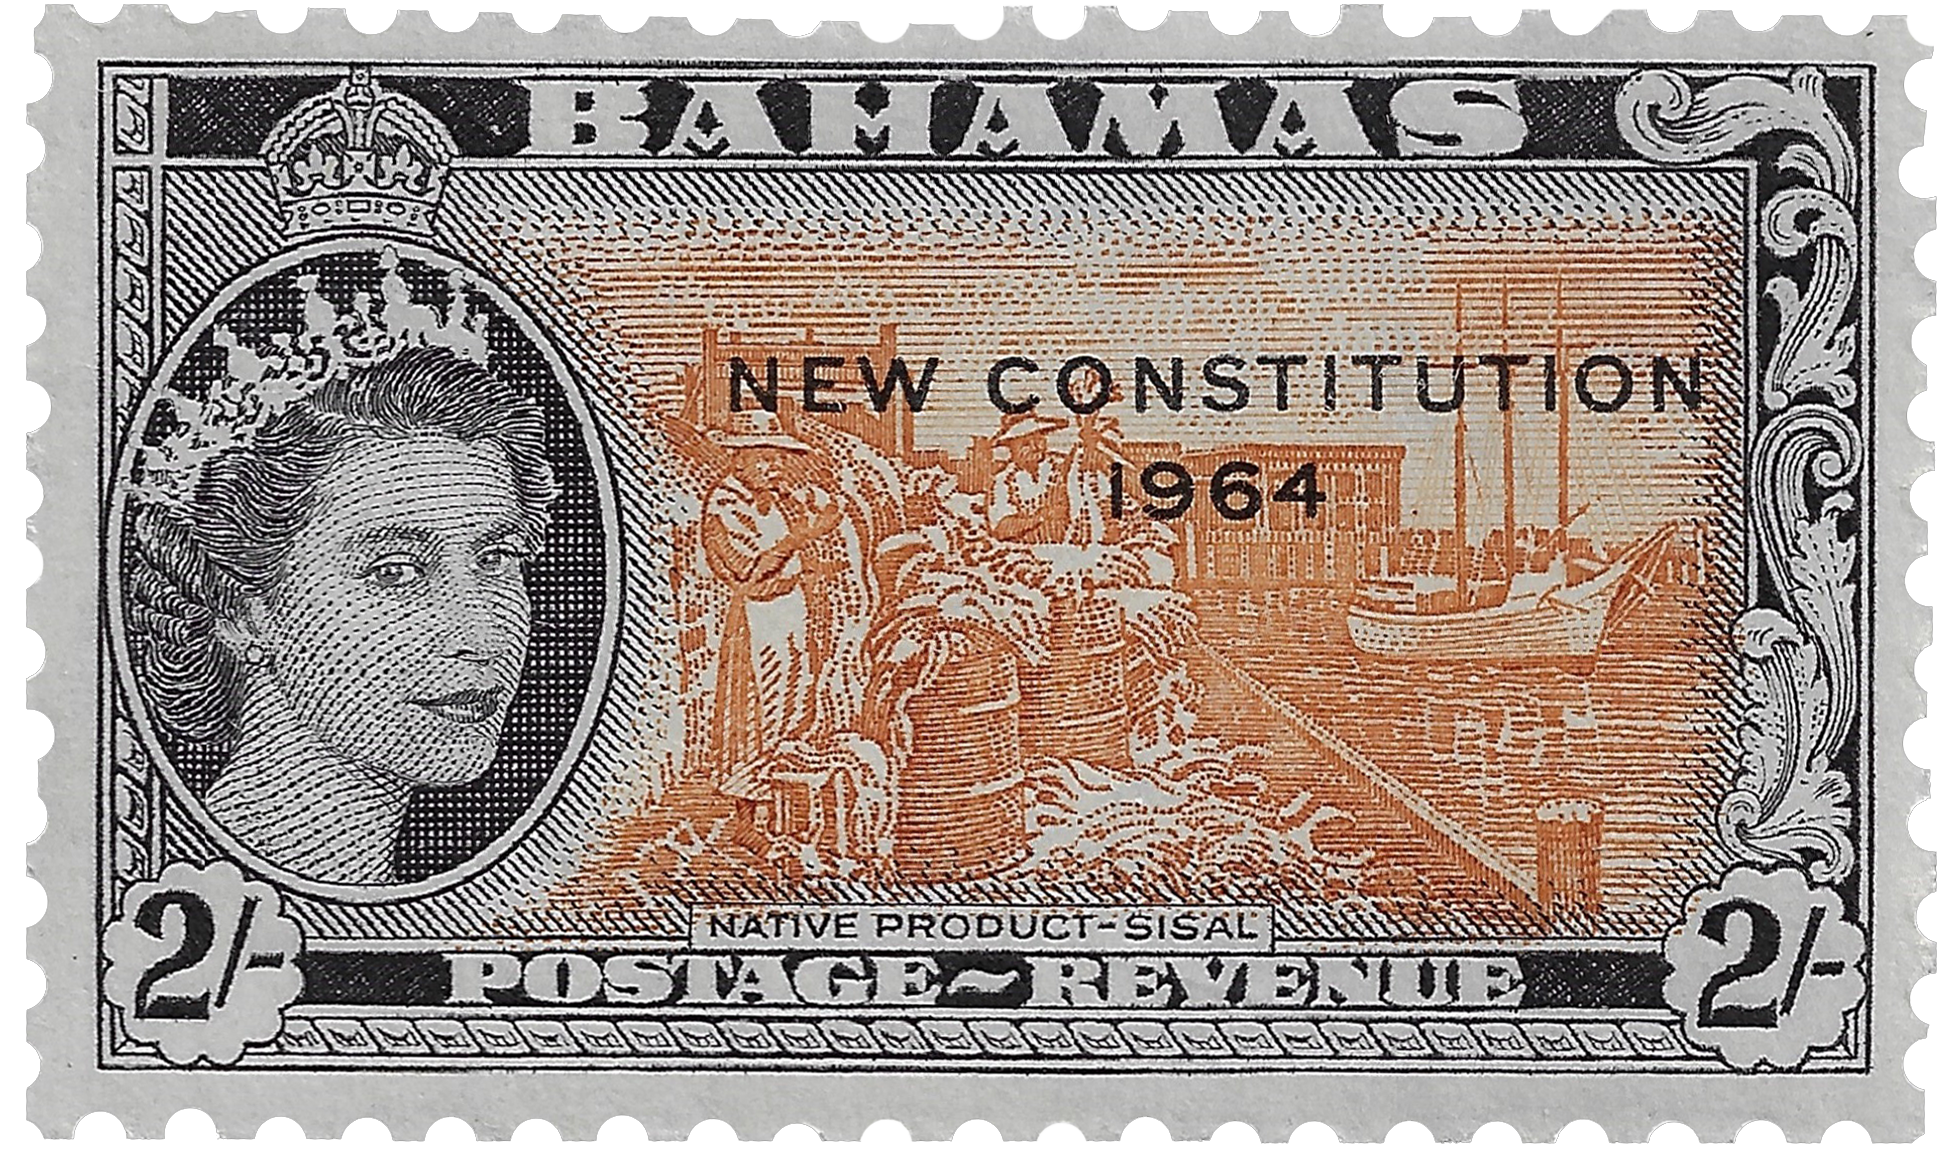 2s 1964, Native Product-Sisal, New Constitution